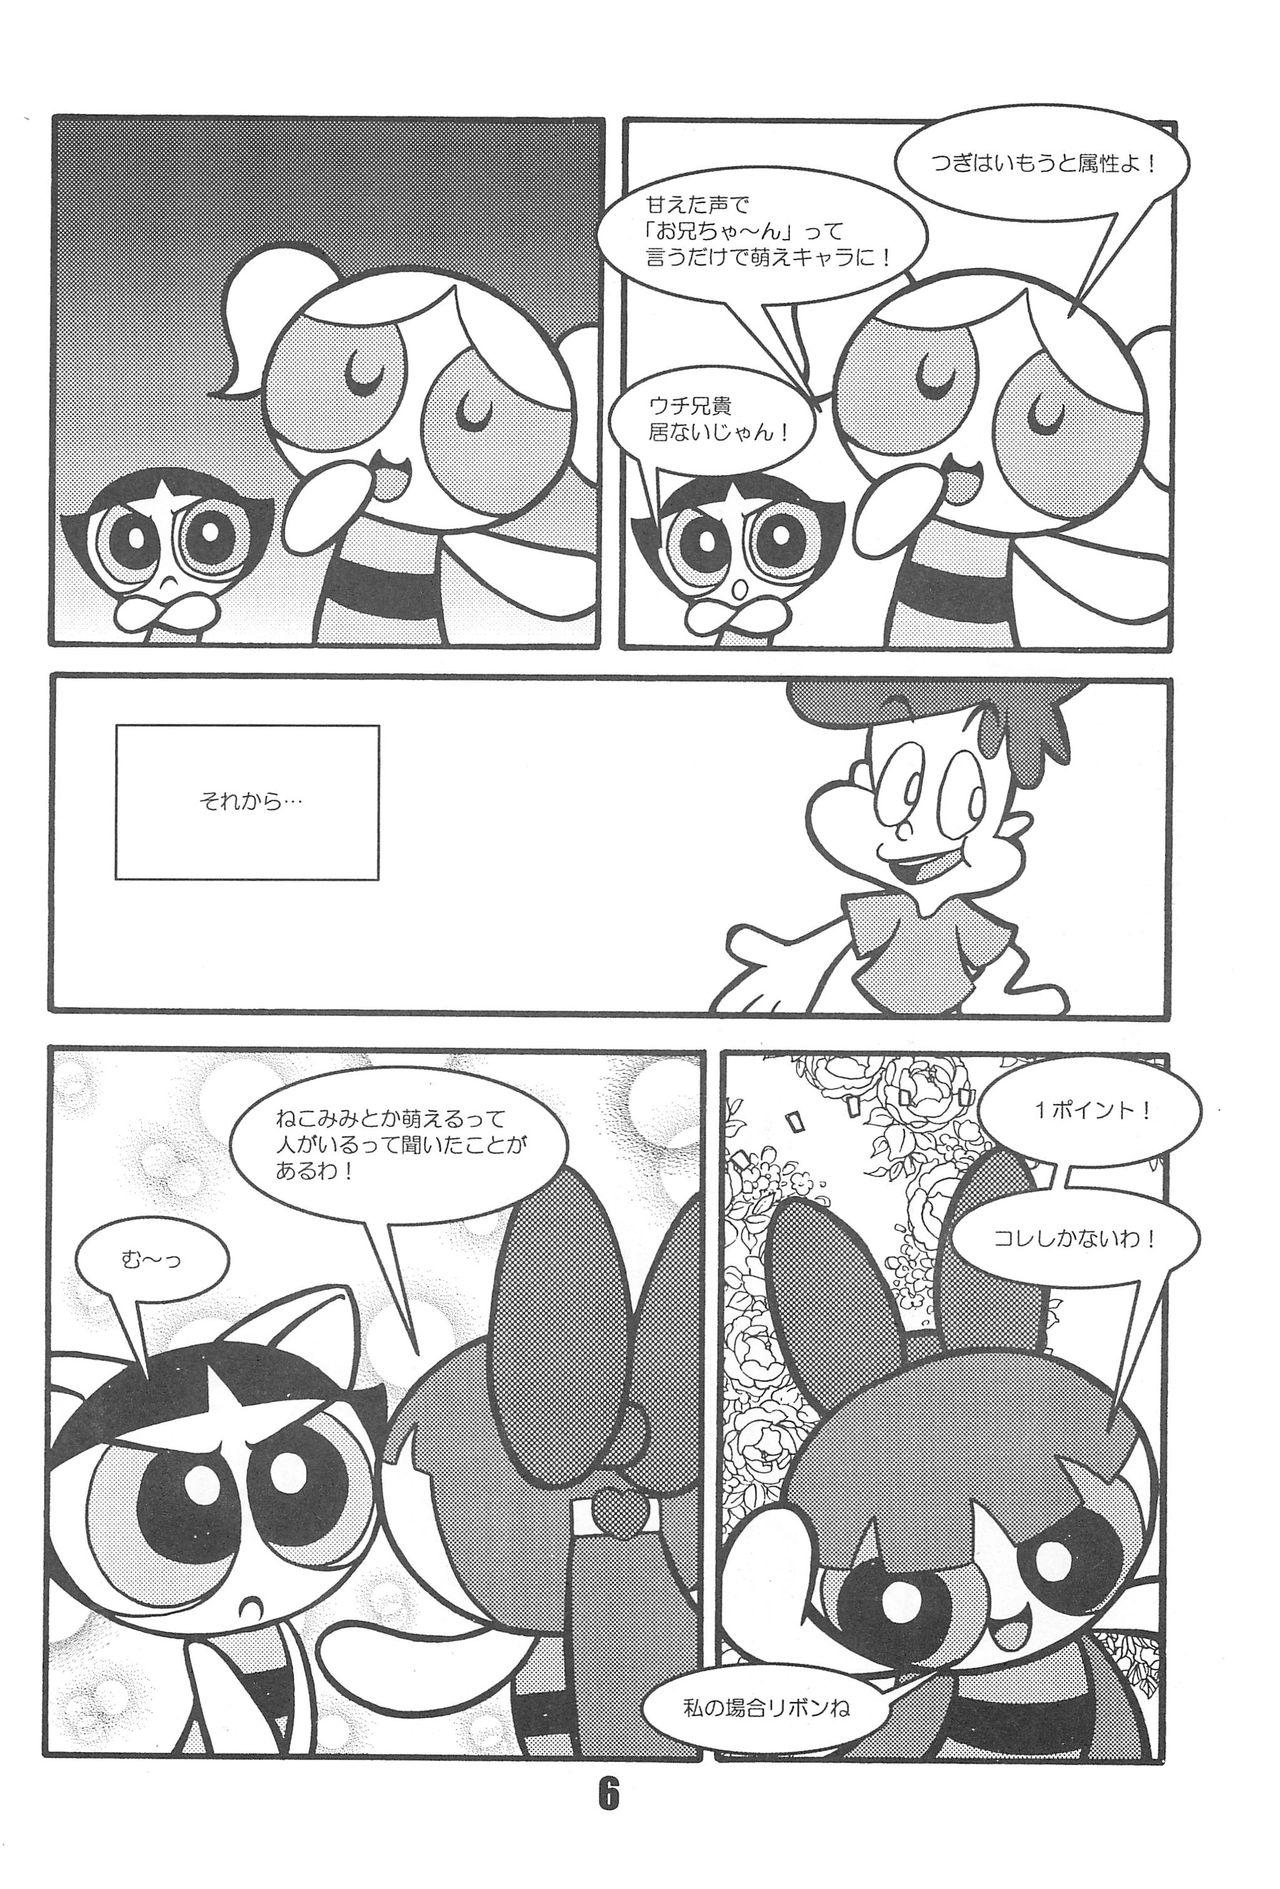 Girlfriends Show Goes On! Funhouse 22th - The powerpuff girls Amateur - Page 6